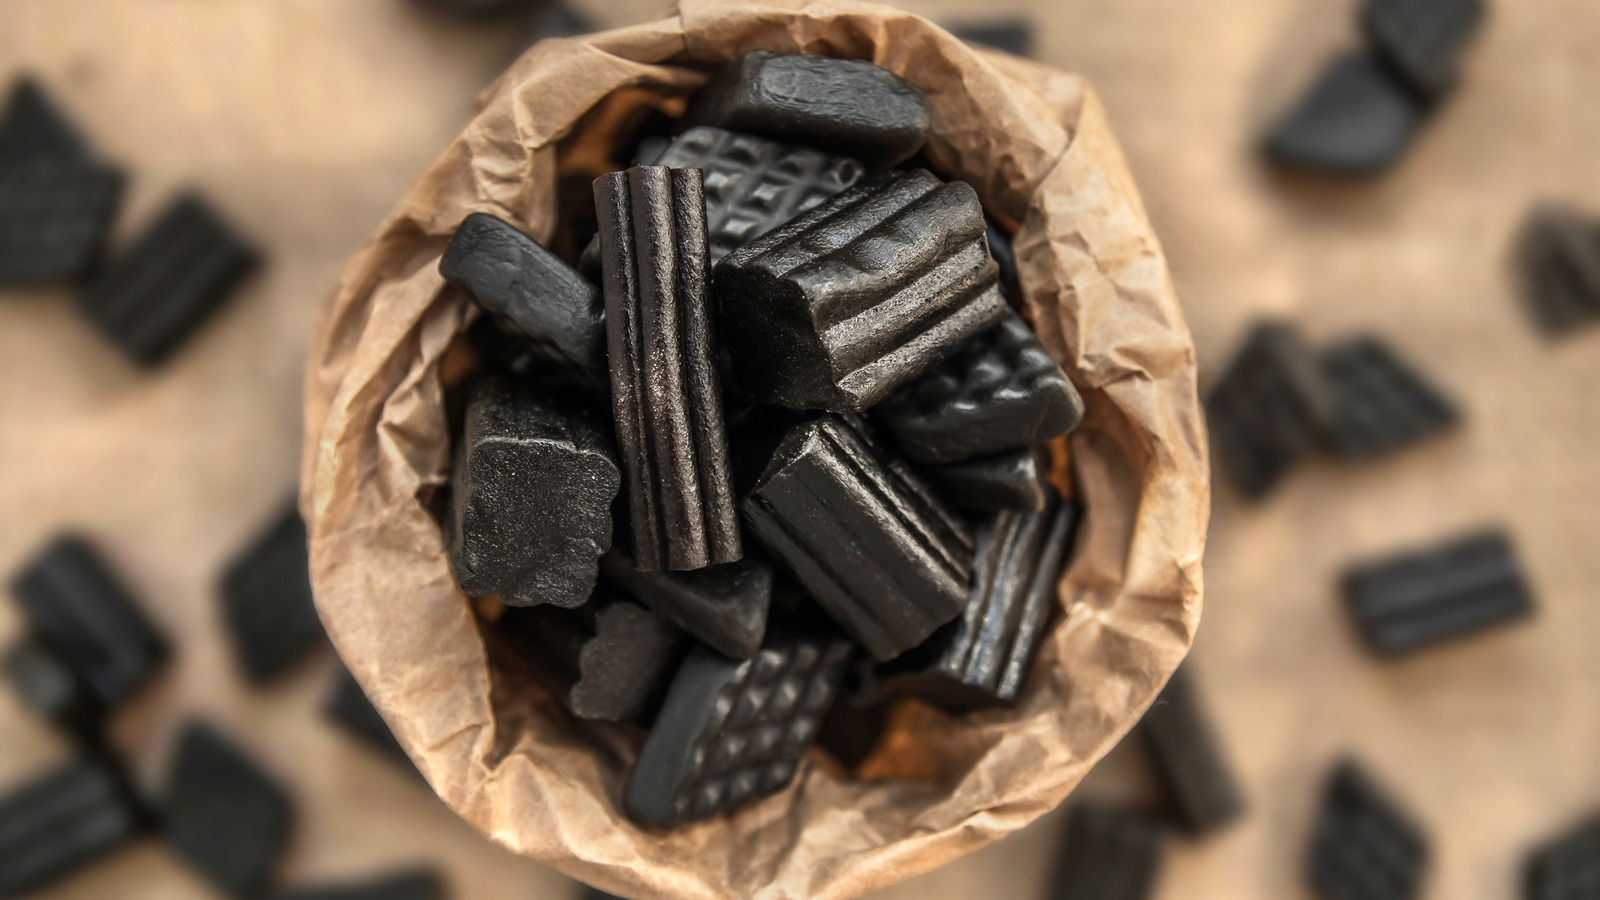 https://www.healthdigest.com/img/gallery/why-eating-black-licorice-is-riskier-than-you-think/l-intro-1608574585.jpg